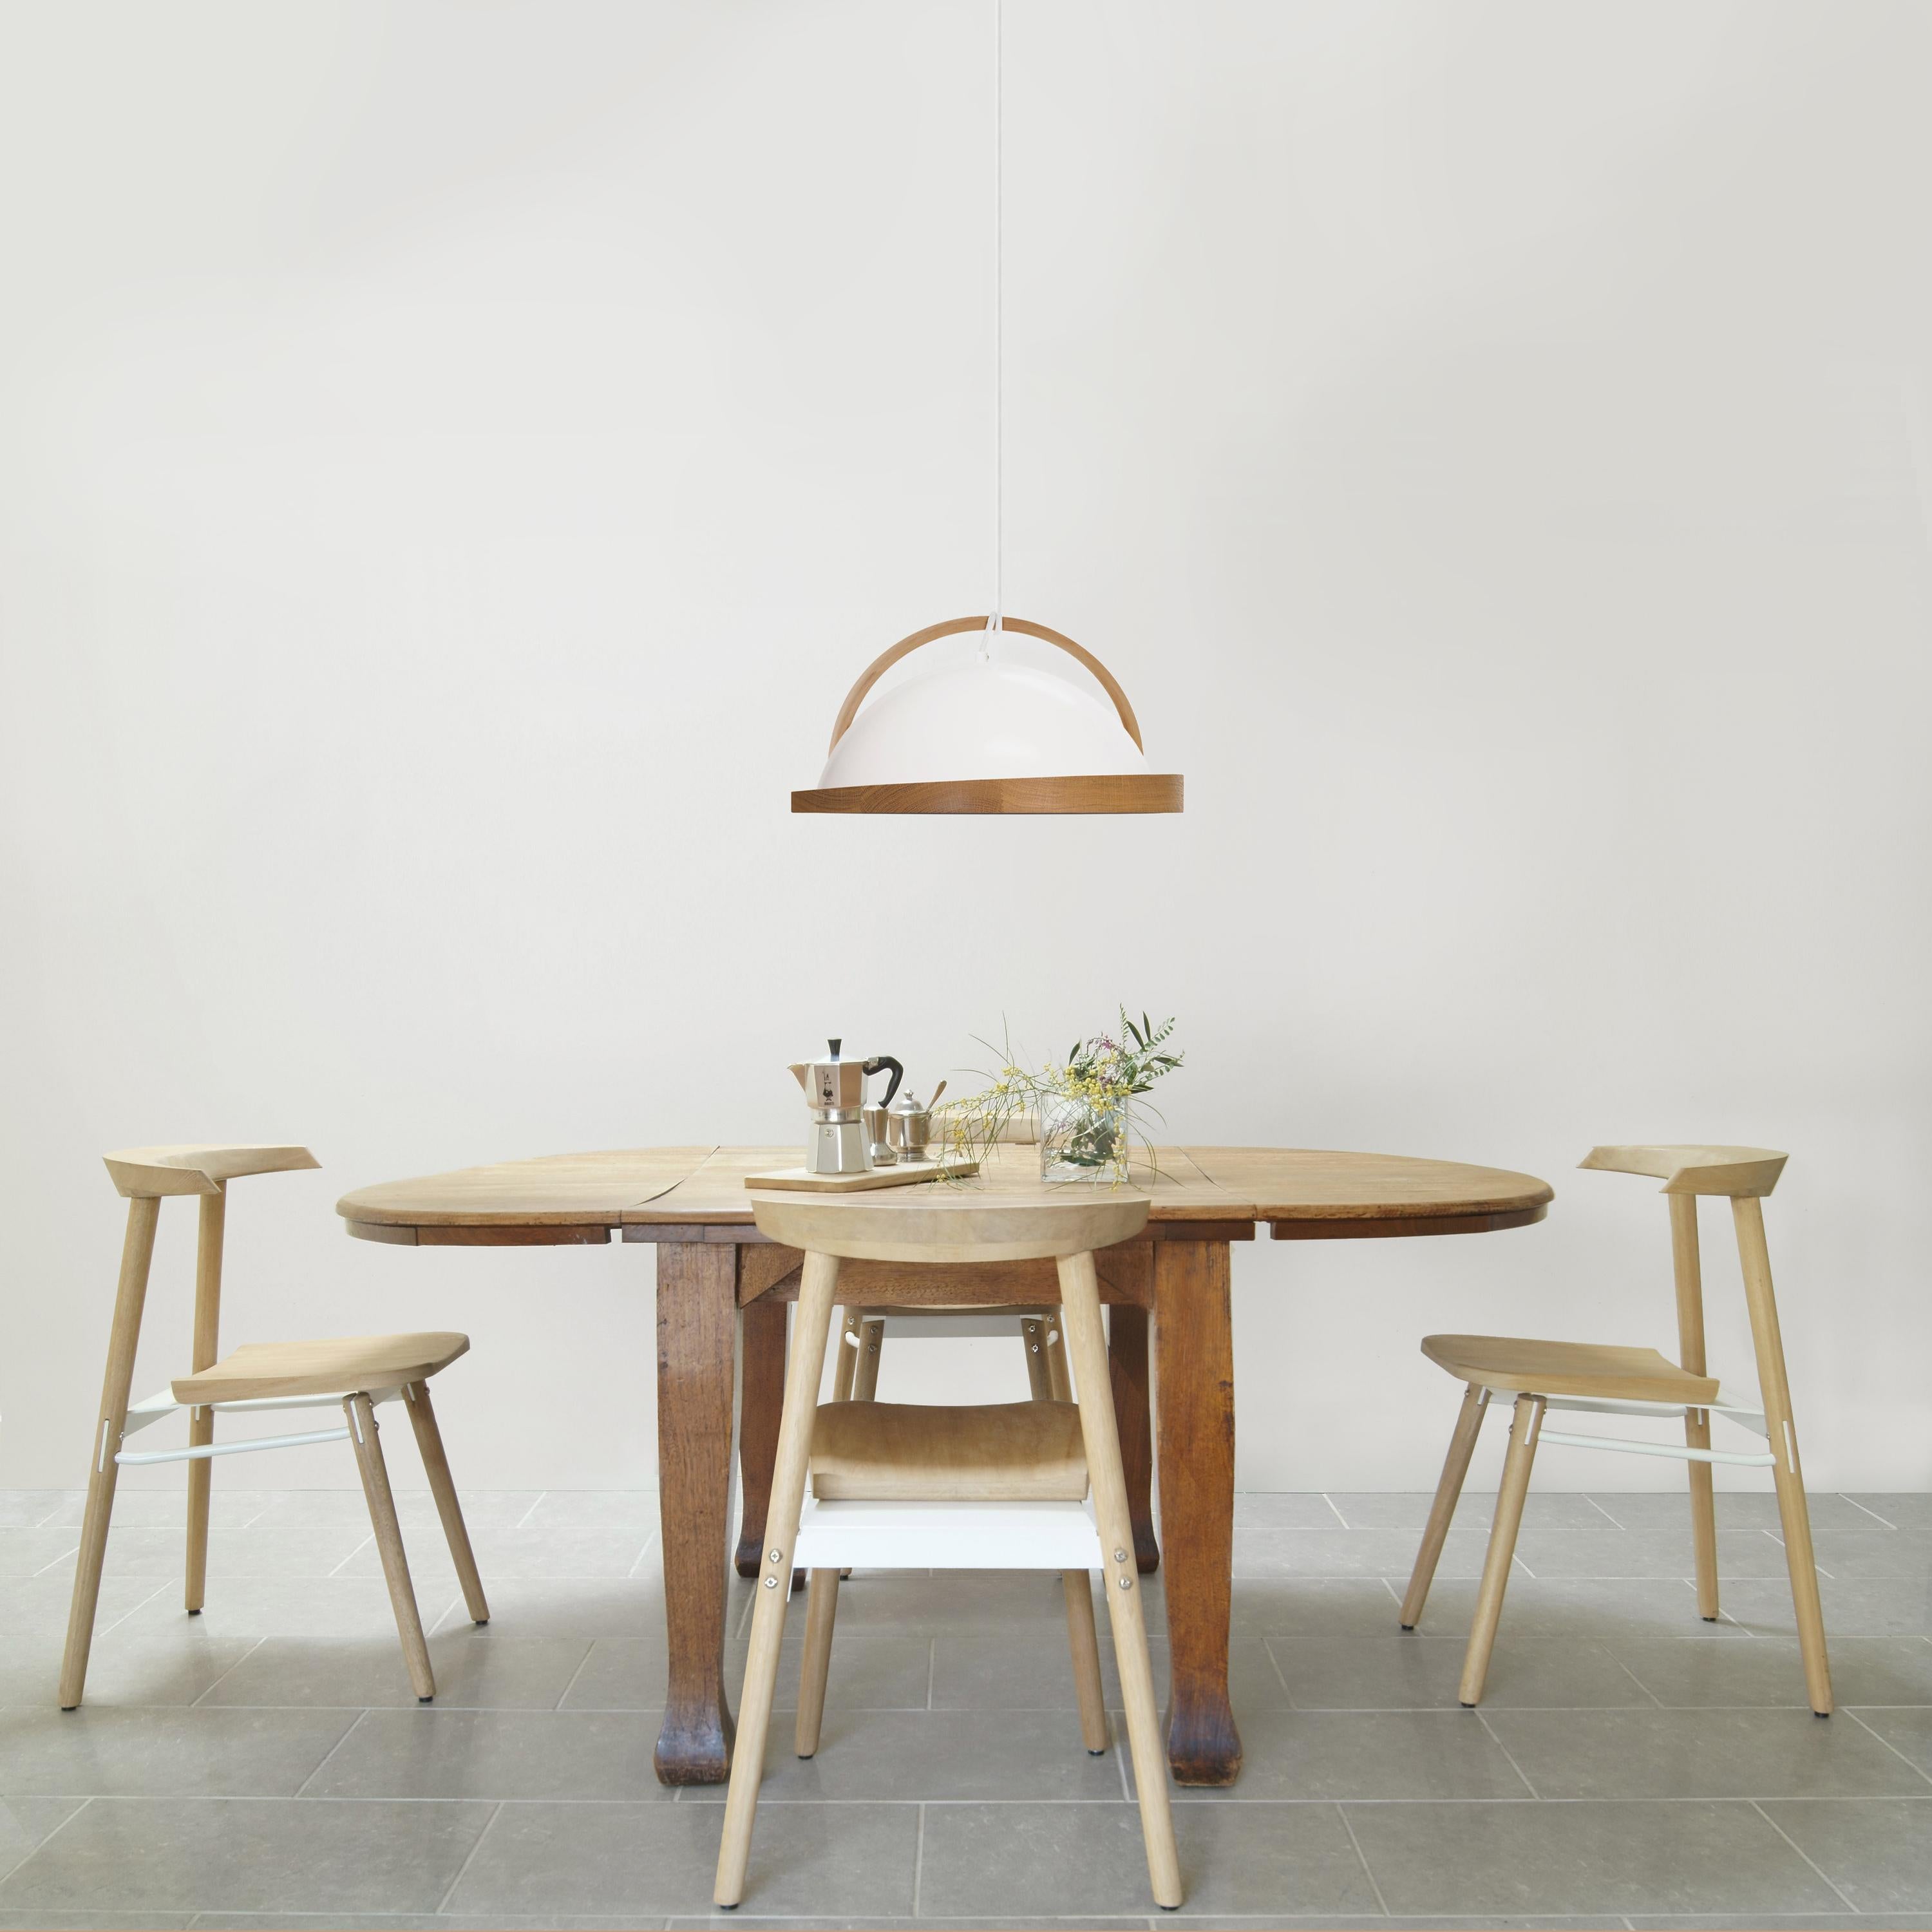 Obelia pendant lights are a collection of local artisan made spun aluminium lights with angled natural solid timber rims as their feature. With the additional bent timber arc and timber dowel, Obelia will hang cozily in all environments.

The